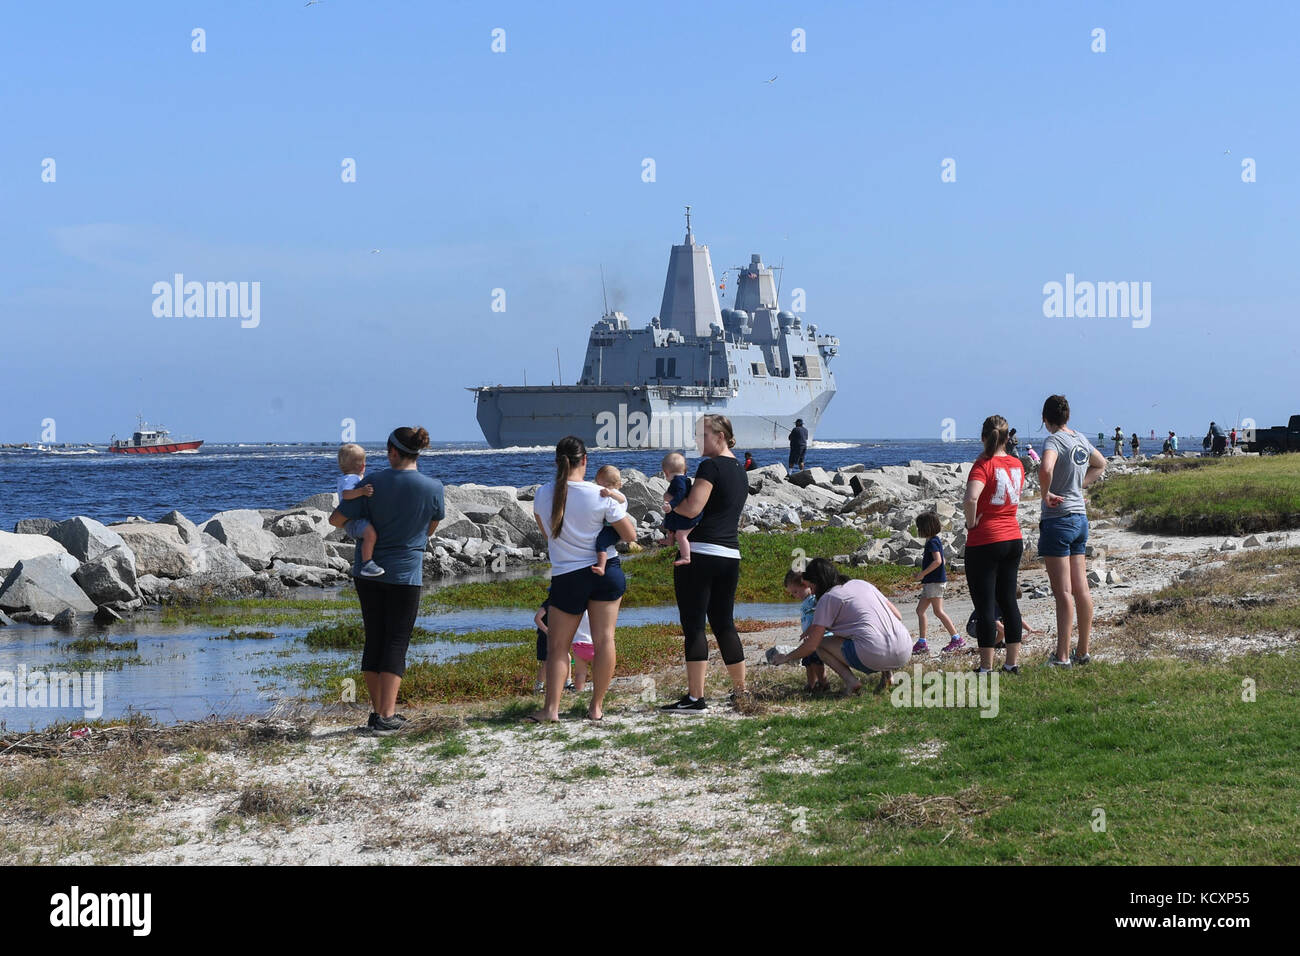 171007-N-TP832-027 JACKSONVILLE, Fla. (Oct. 7, 2017) Families watch as the amphibious transport dock ship USS New York (LPD 21) departs Naval Station Mayport to provide relief efforts to the Gulf Coast region in anticipation of Hurricane Nathan. (U.S. Navy photo by Mass Communication Specialist 3rd Class Michael Lopez/Released) Stock Photo